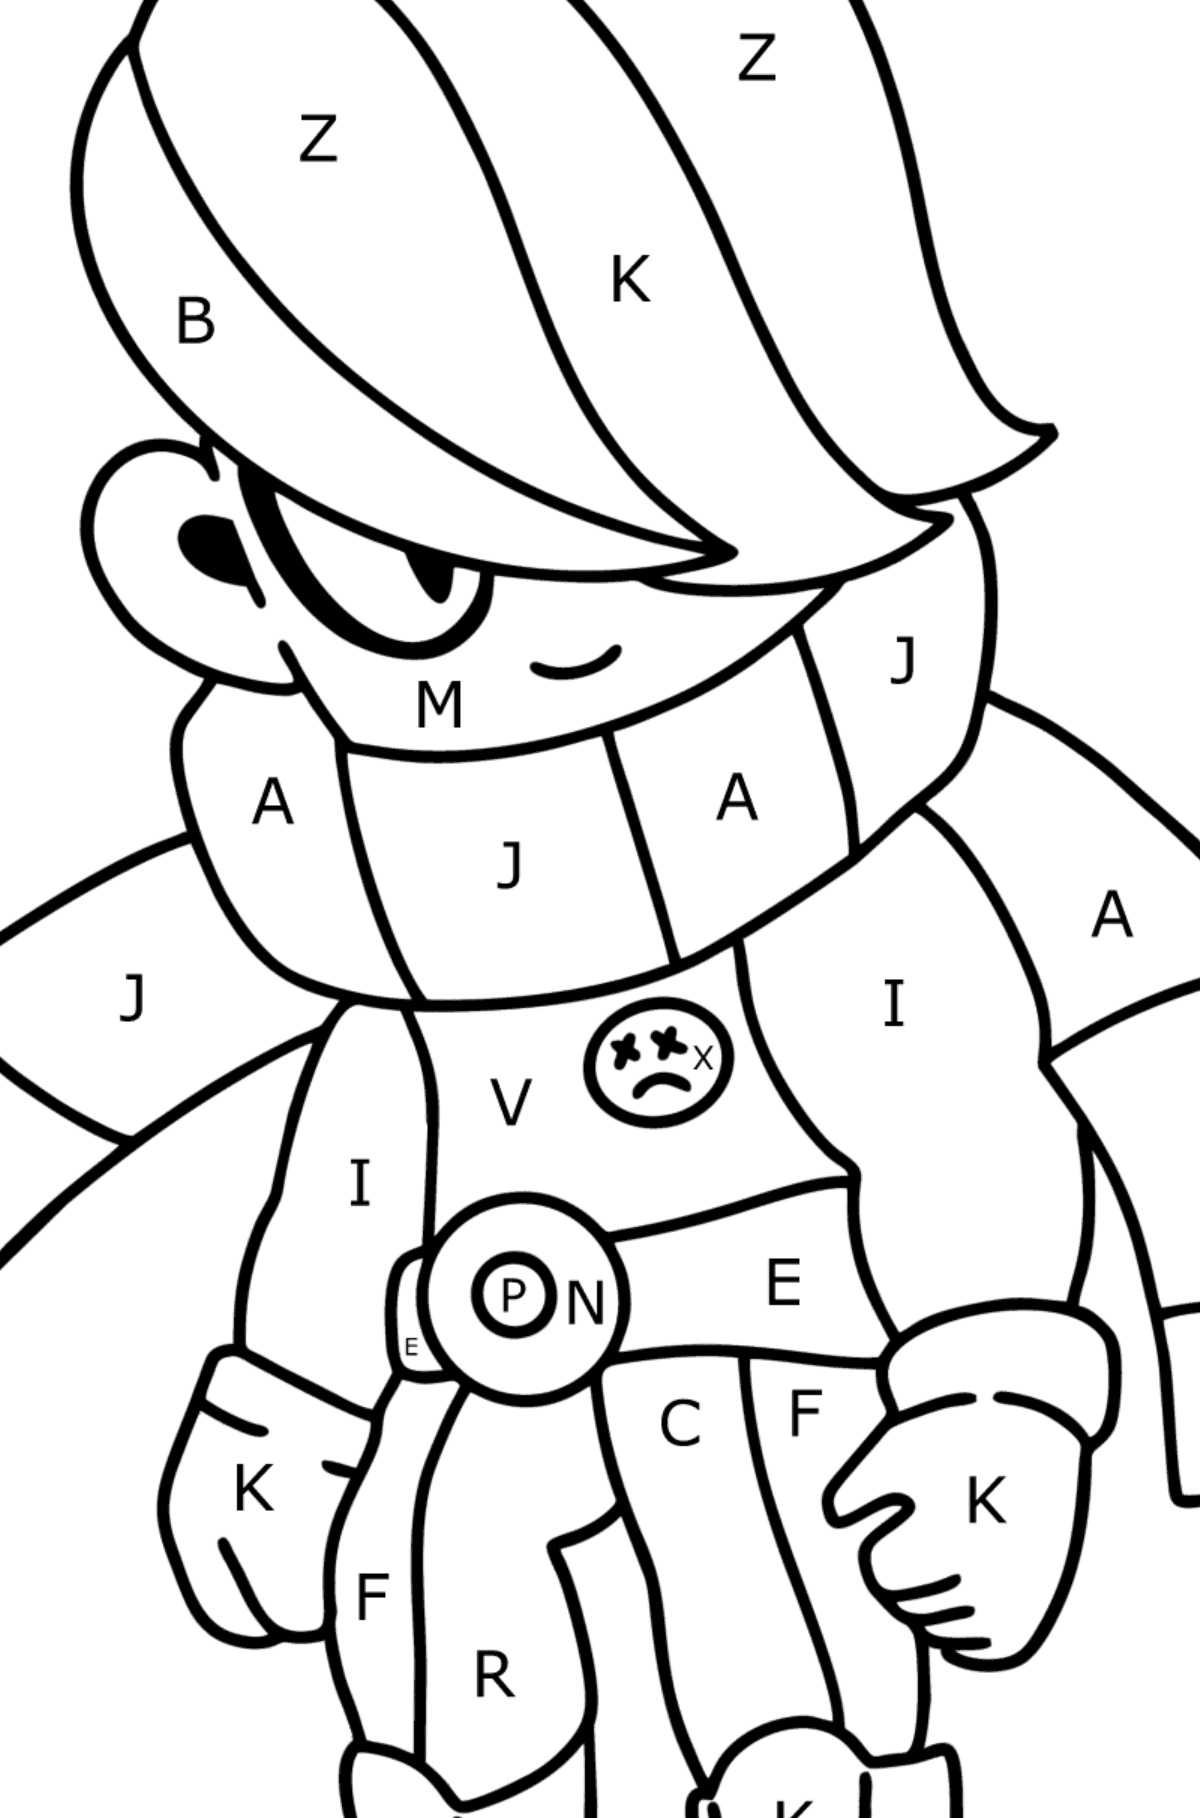 Brawl Stars Edgar coloring page - Coloring by Letters for Kids